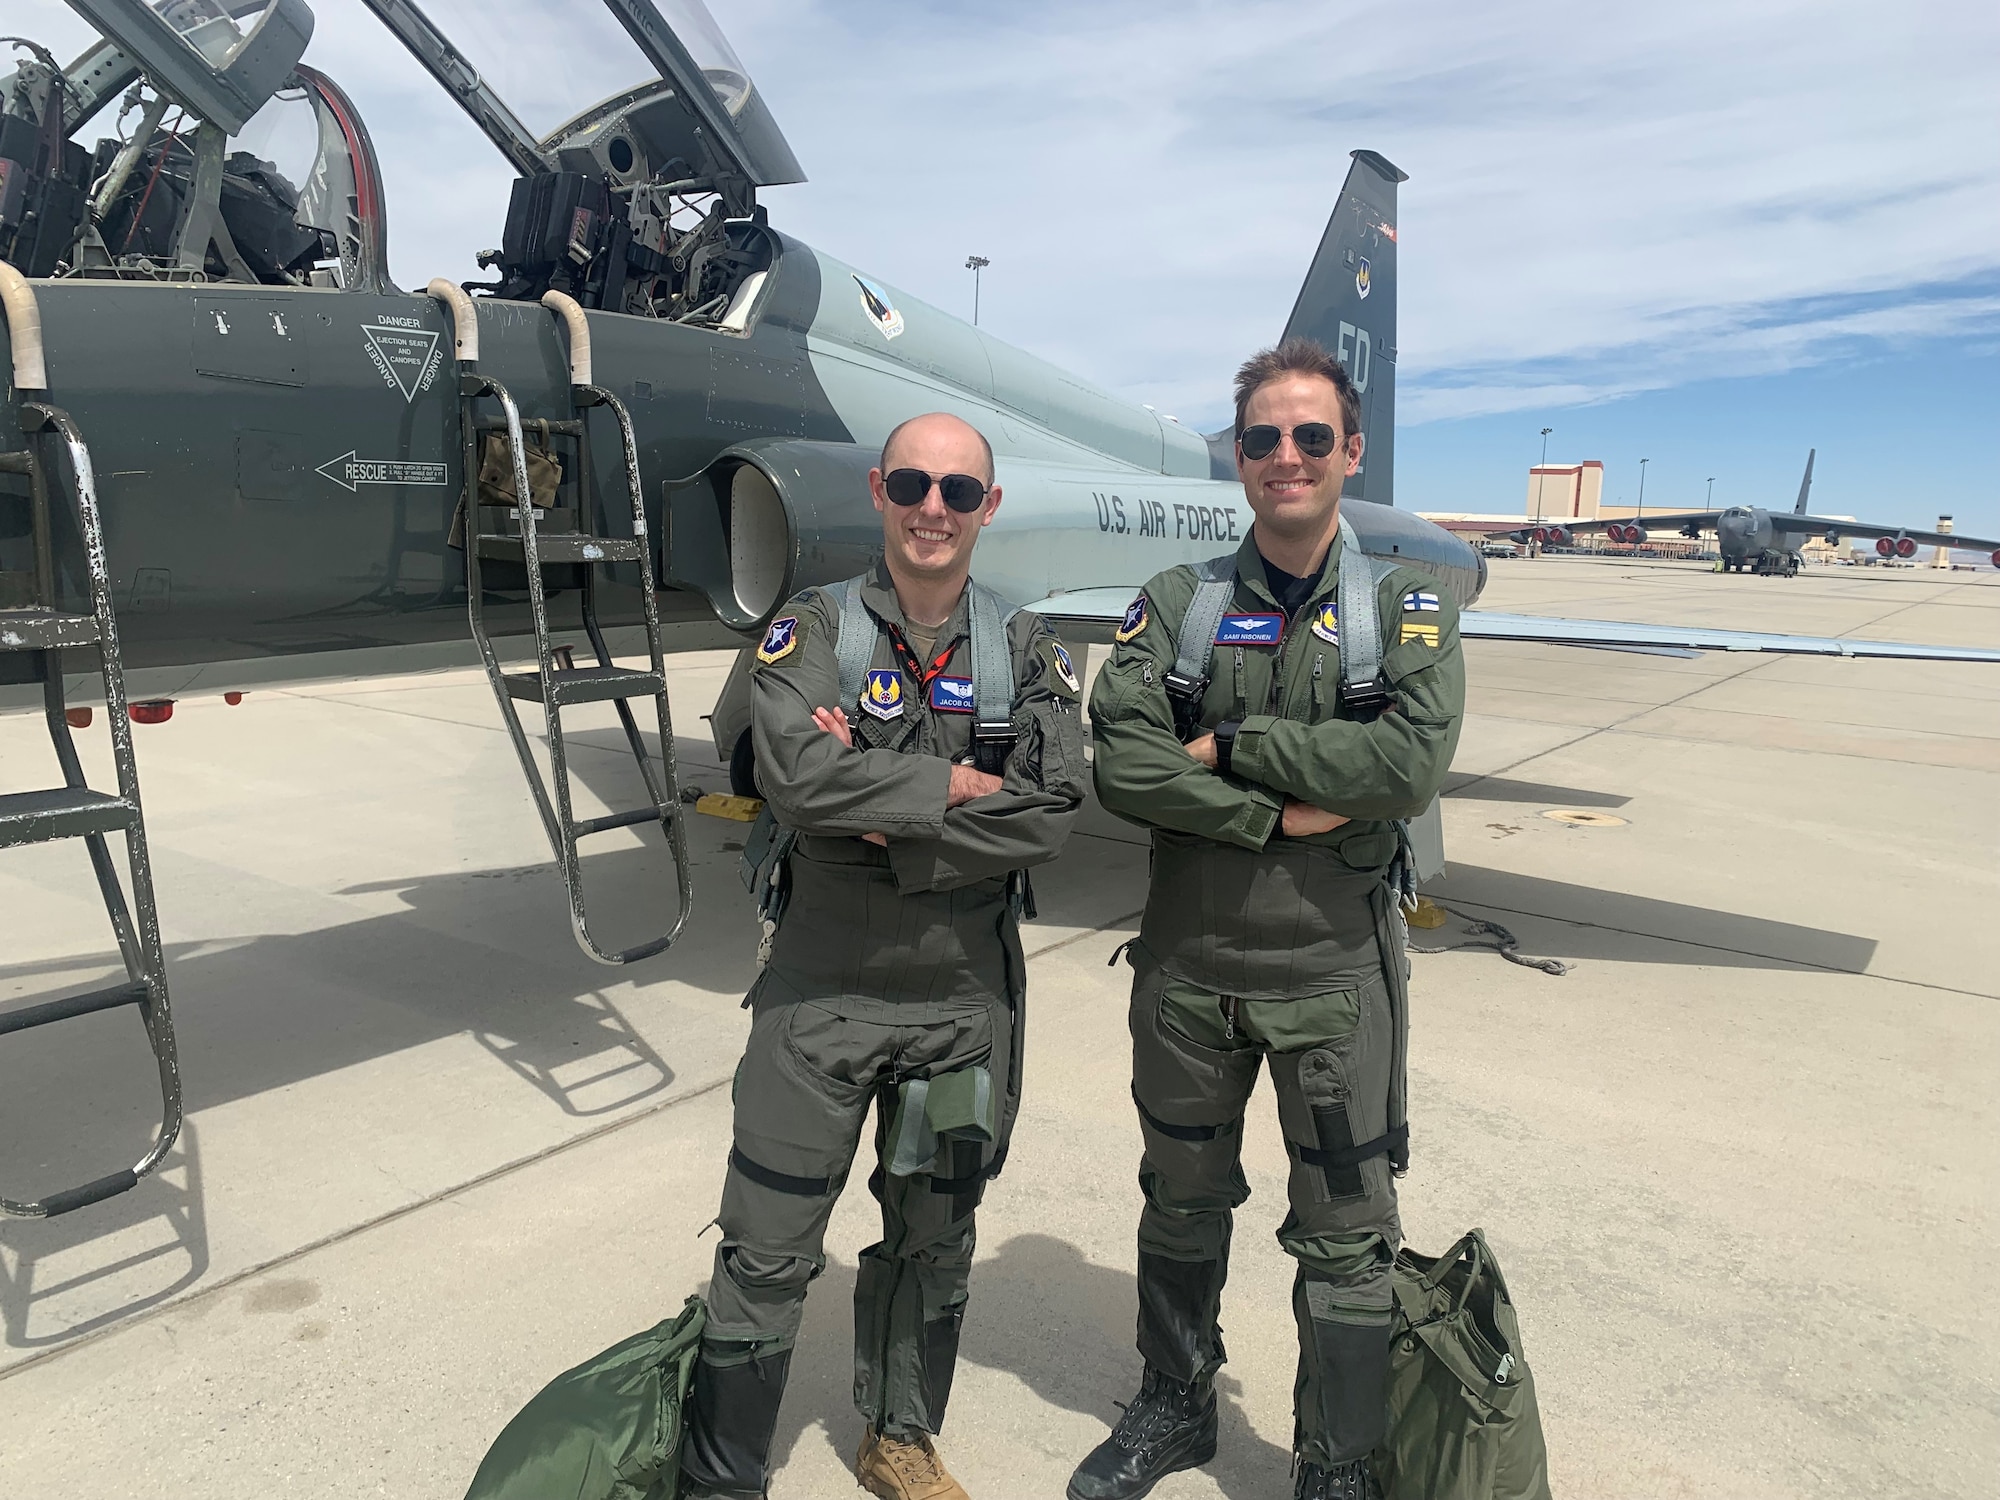 U.S. Air Force Test Pilot School Class 23A students Capt. Sami Nisonen of the Finnish Air Force and Capt. Jacob Olsen of the USAF pose for a photo after flying a T-38 Talon. This technical exchange would be the very first joint US - Finland flight operation after Finland officially joined the NATO defensive alliance.